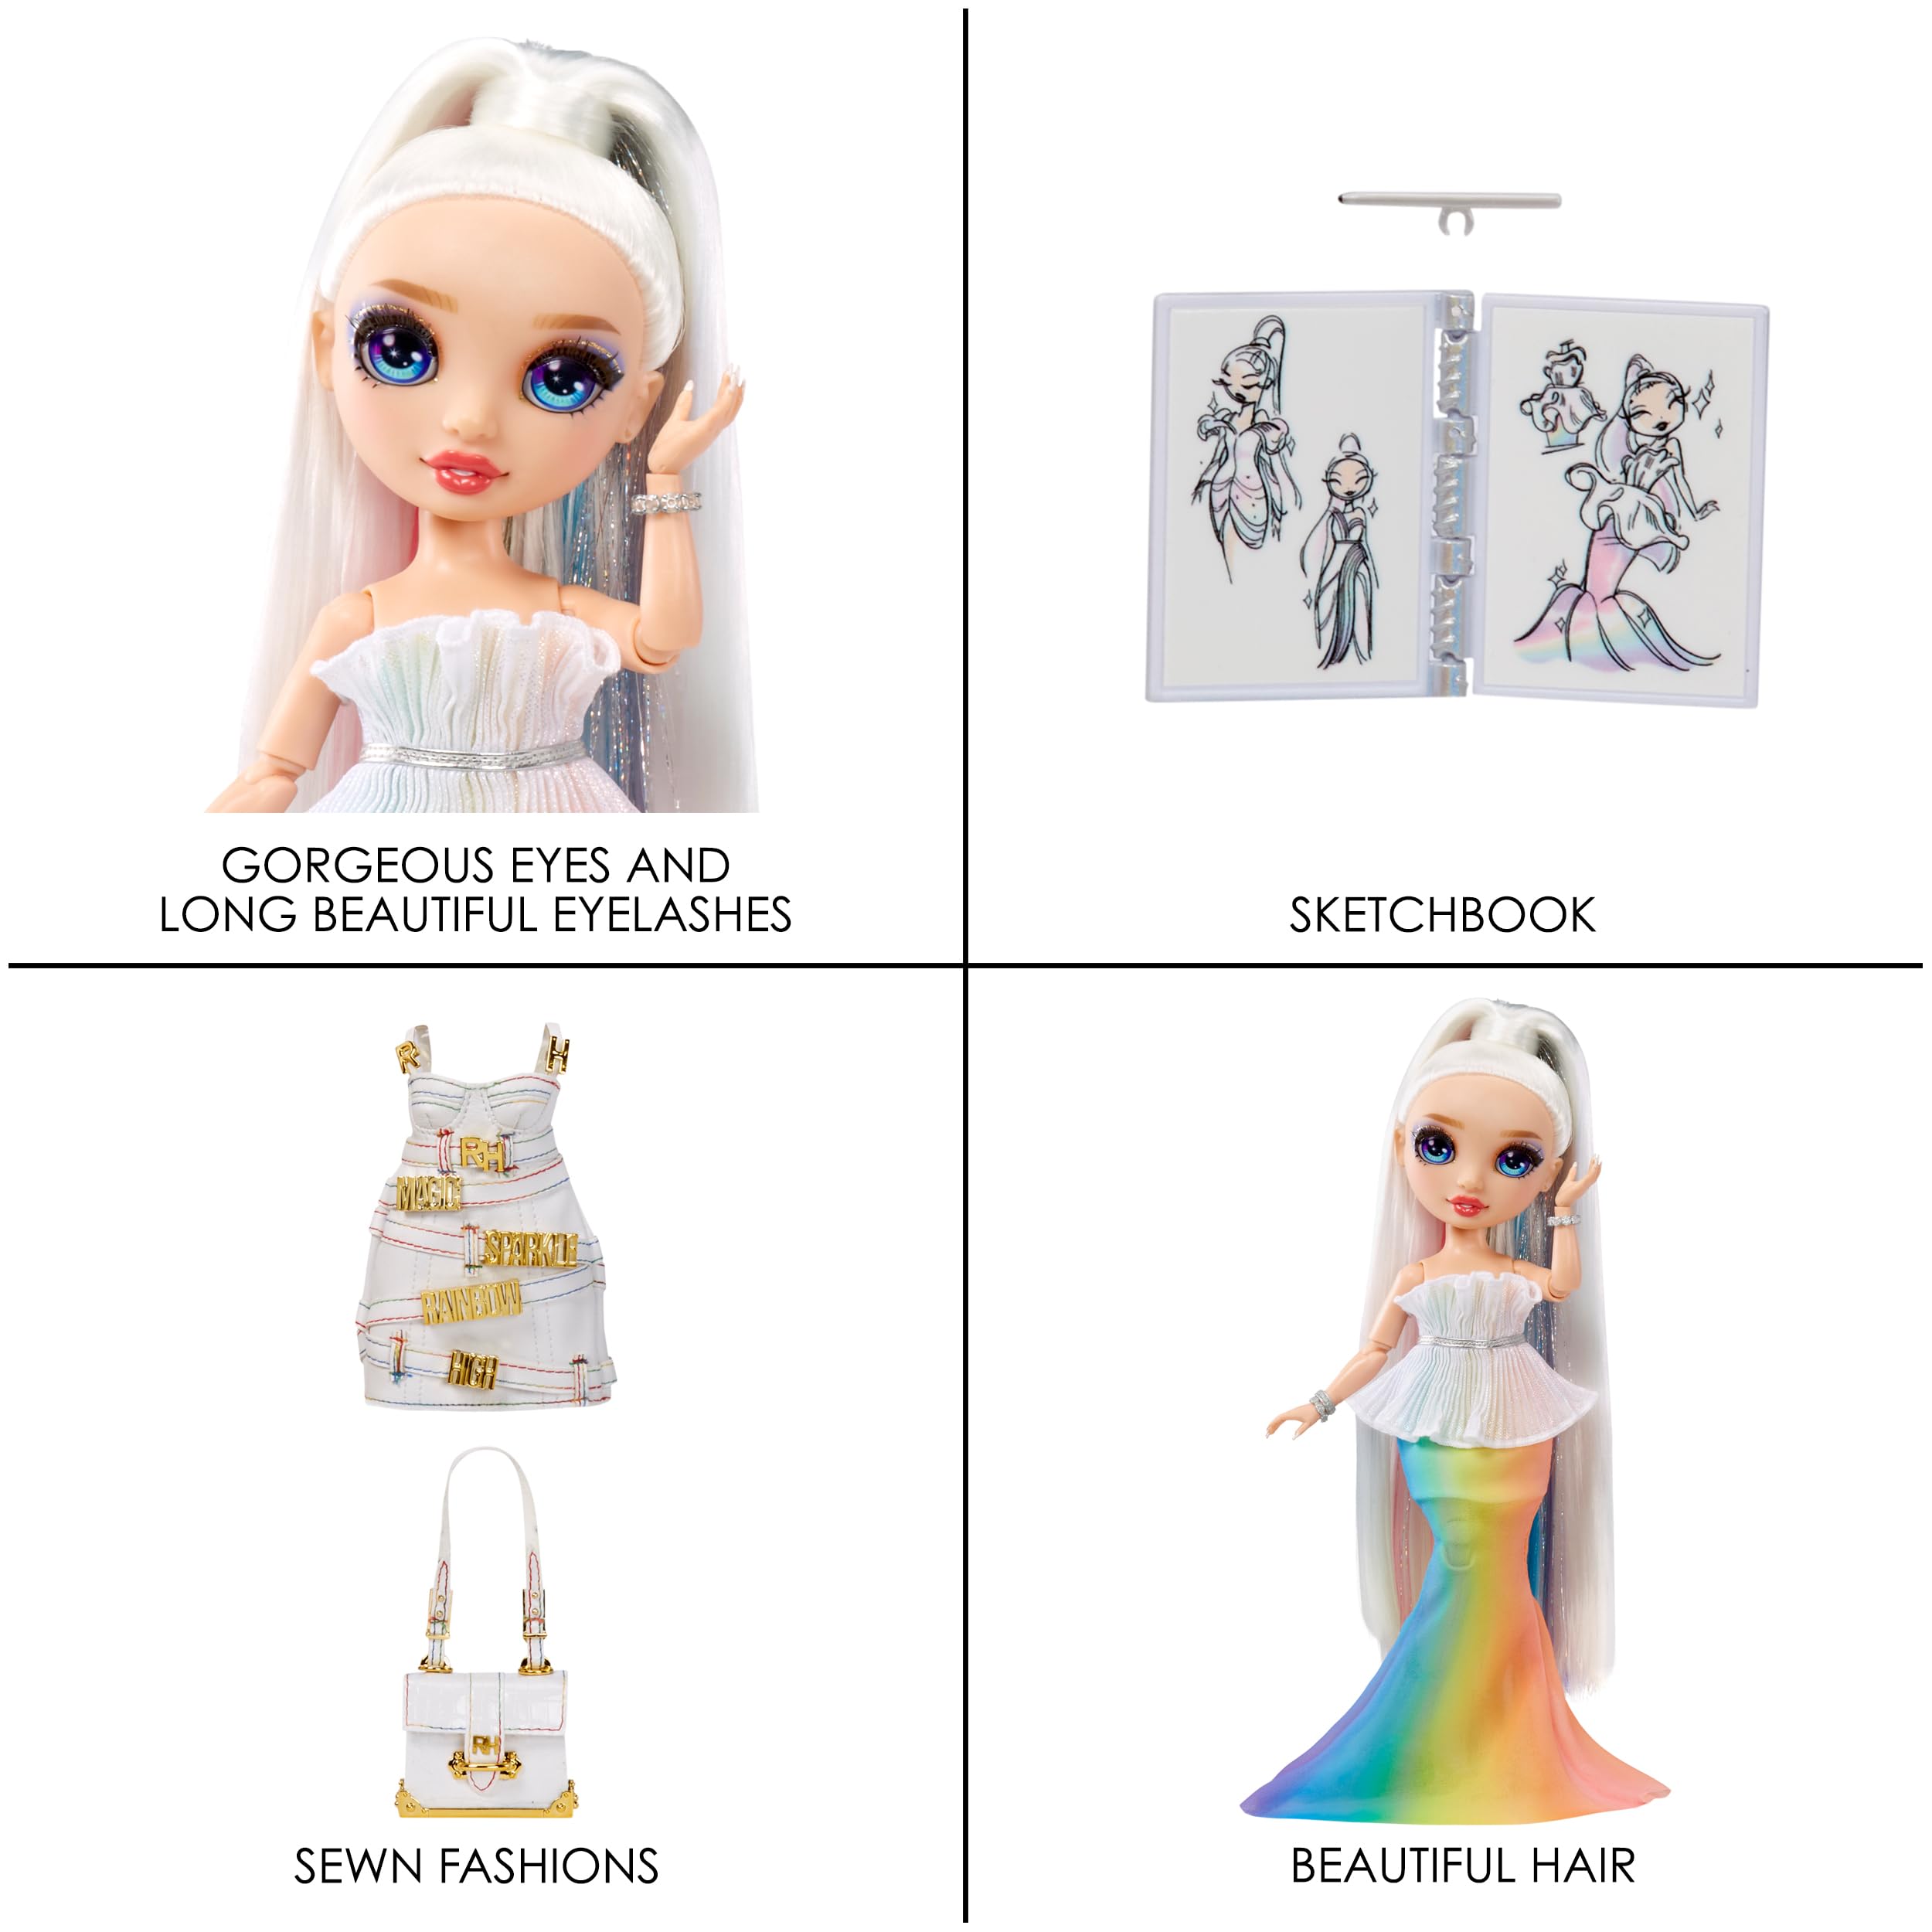 Rainbow High Fantastic Fashion Amaya Raine – Rainbow 11” Fashion Doll and Playset with 2 Complete Doll Outfits, and Fashion Play Accessories, Great Gift for Kids 4-12 Years Old